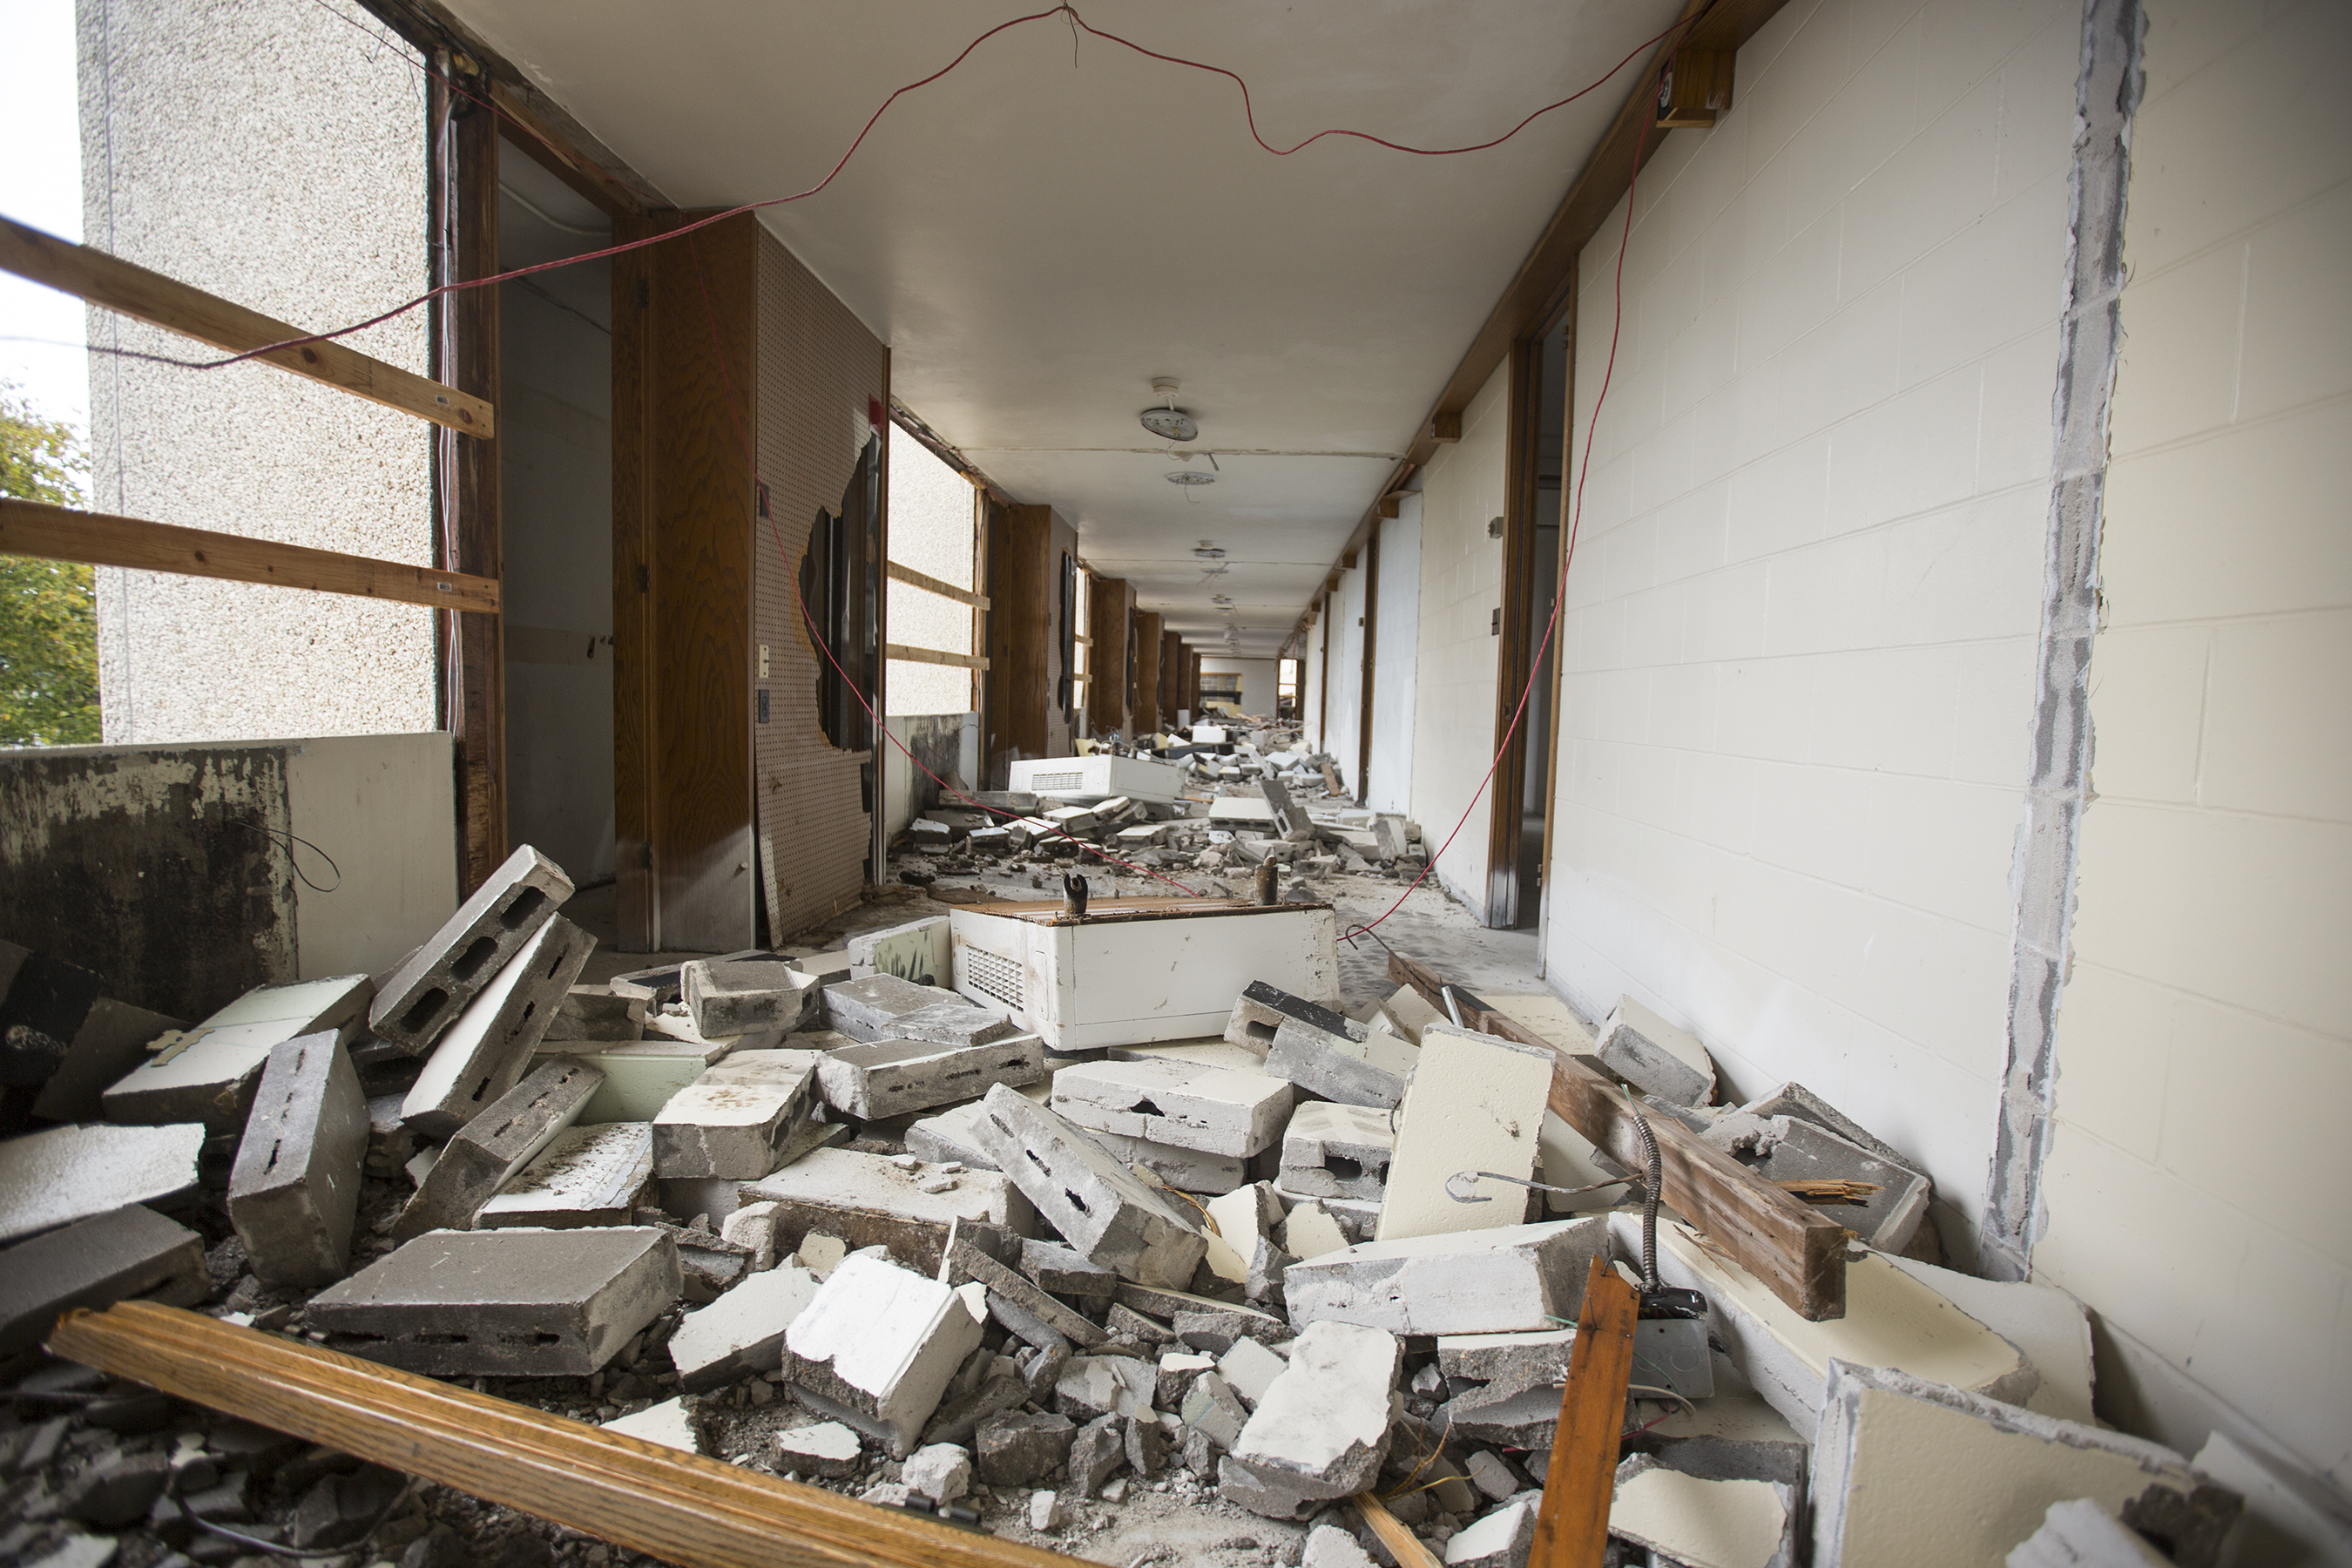 Walls between rooms on the fourth floor of Cather Hall have been turned to rubble as part of implosion prep.